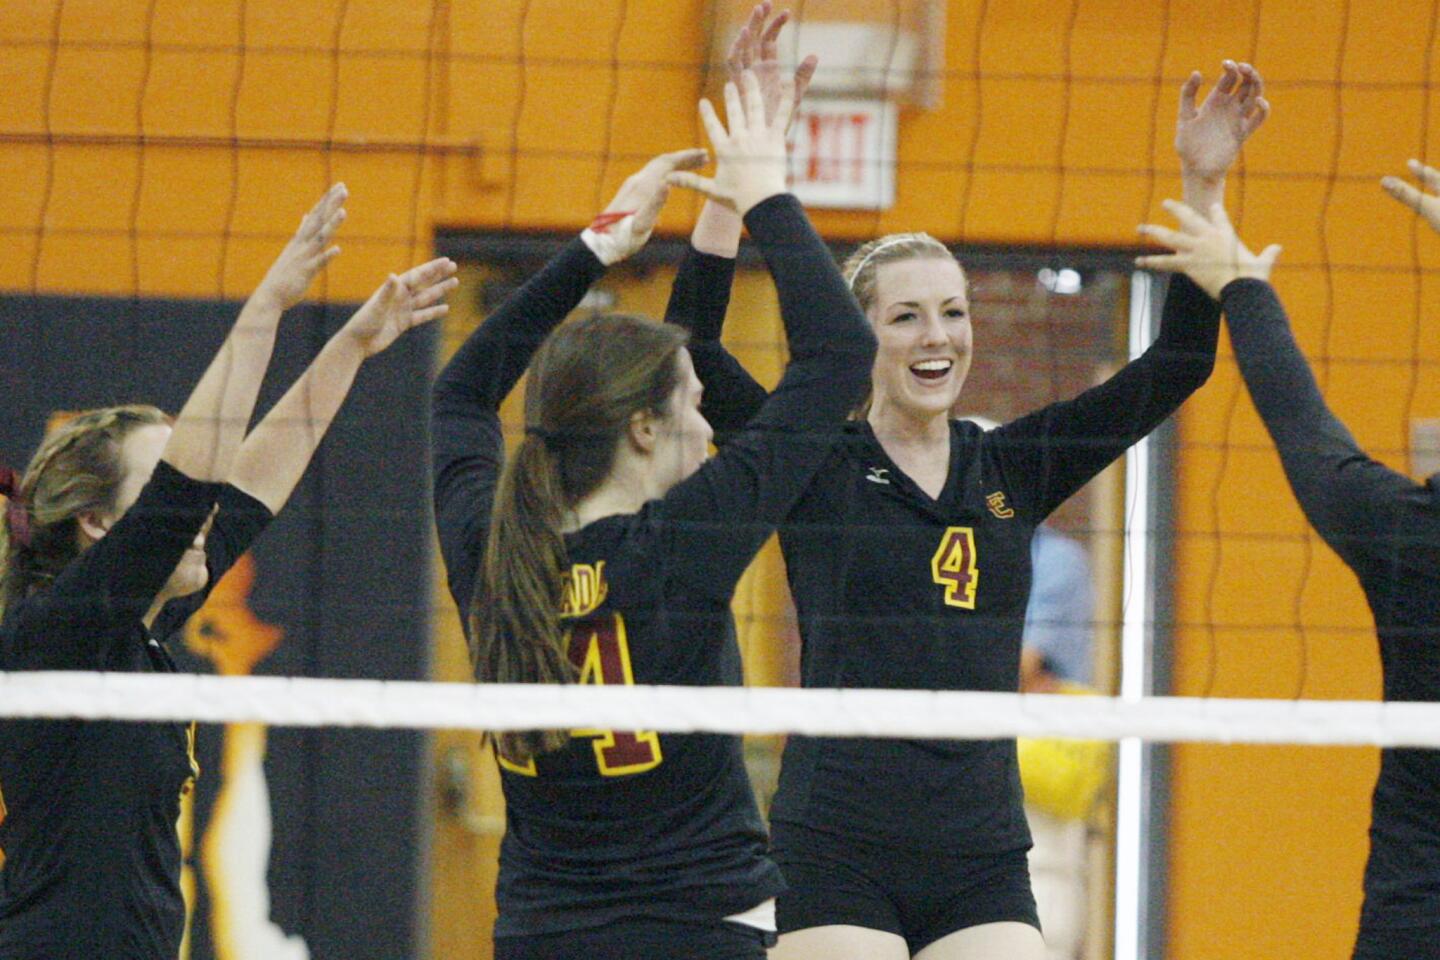 La Canada's Kendall Walbrecht gives her team a high five after making a point during a game against South Pasadena at South Pasadena High School on Thursday, September 27, 2012.